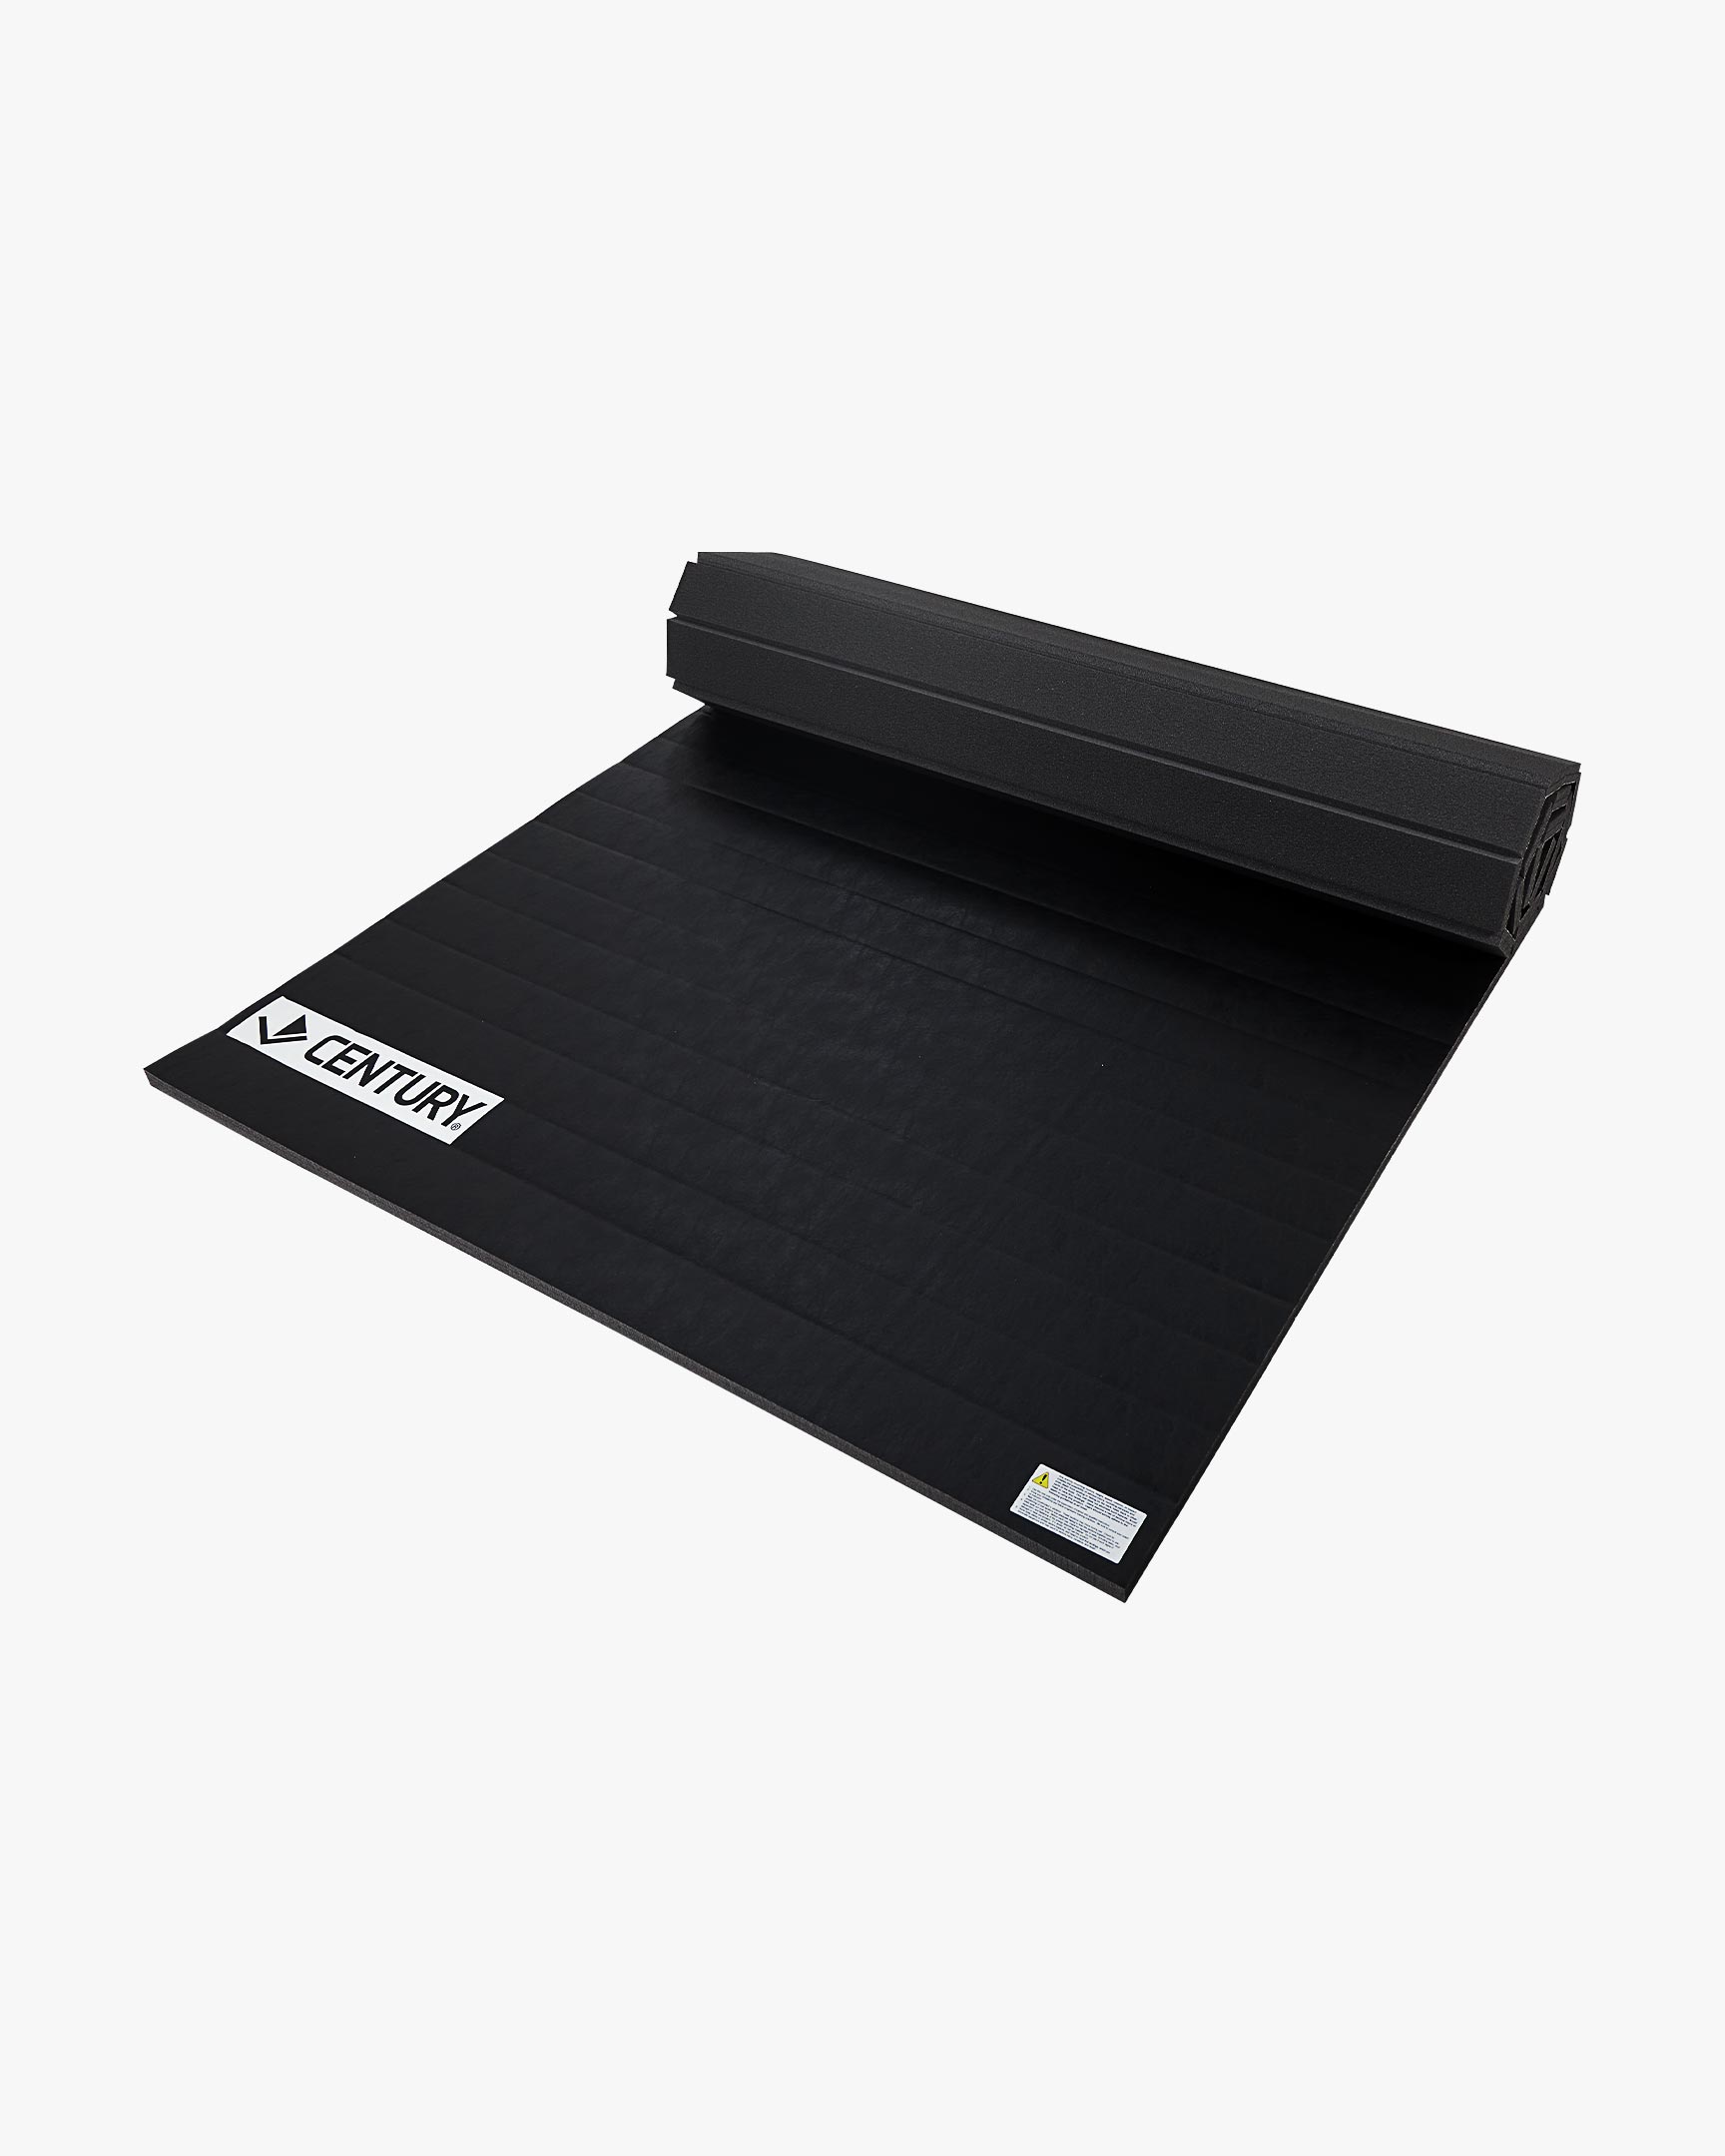 Home Tatami Rollout Mat - 5' x 10' x 1.25" Thick Black